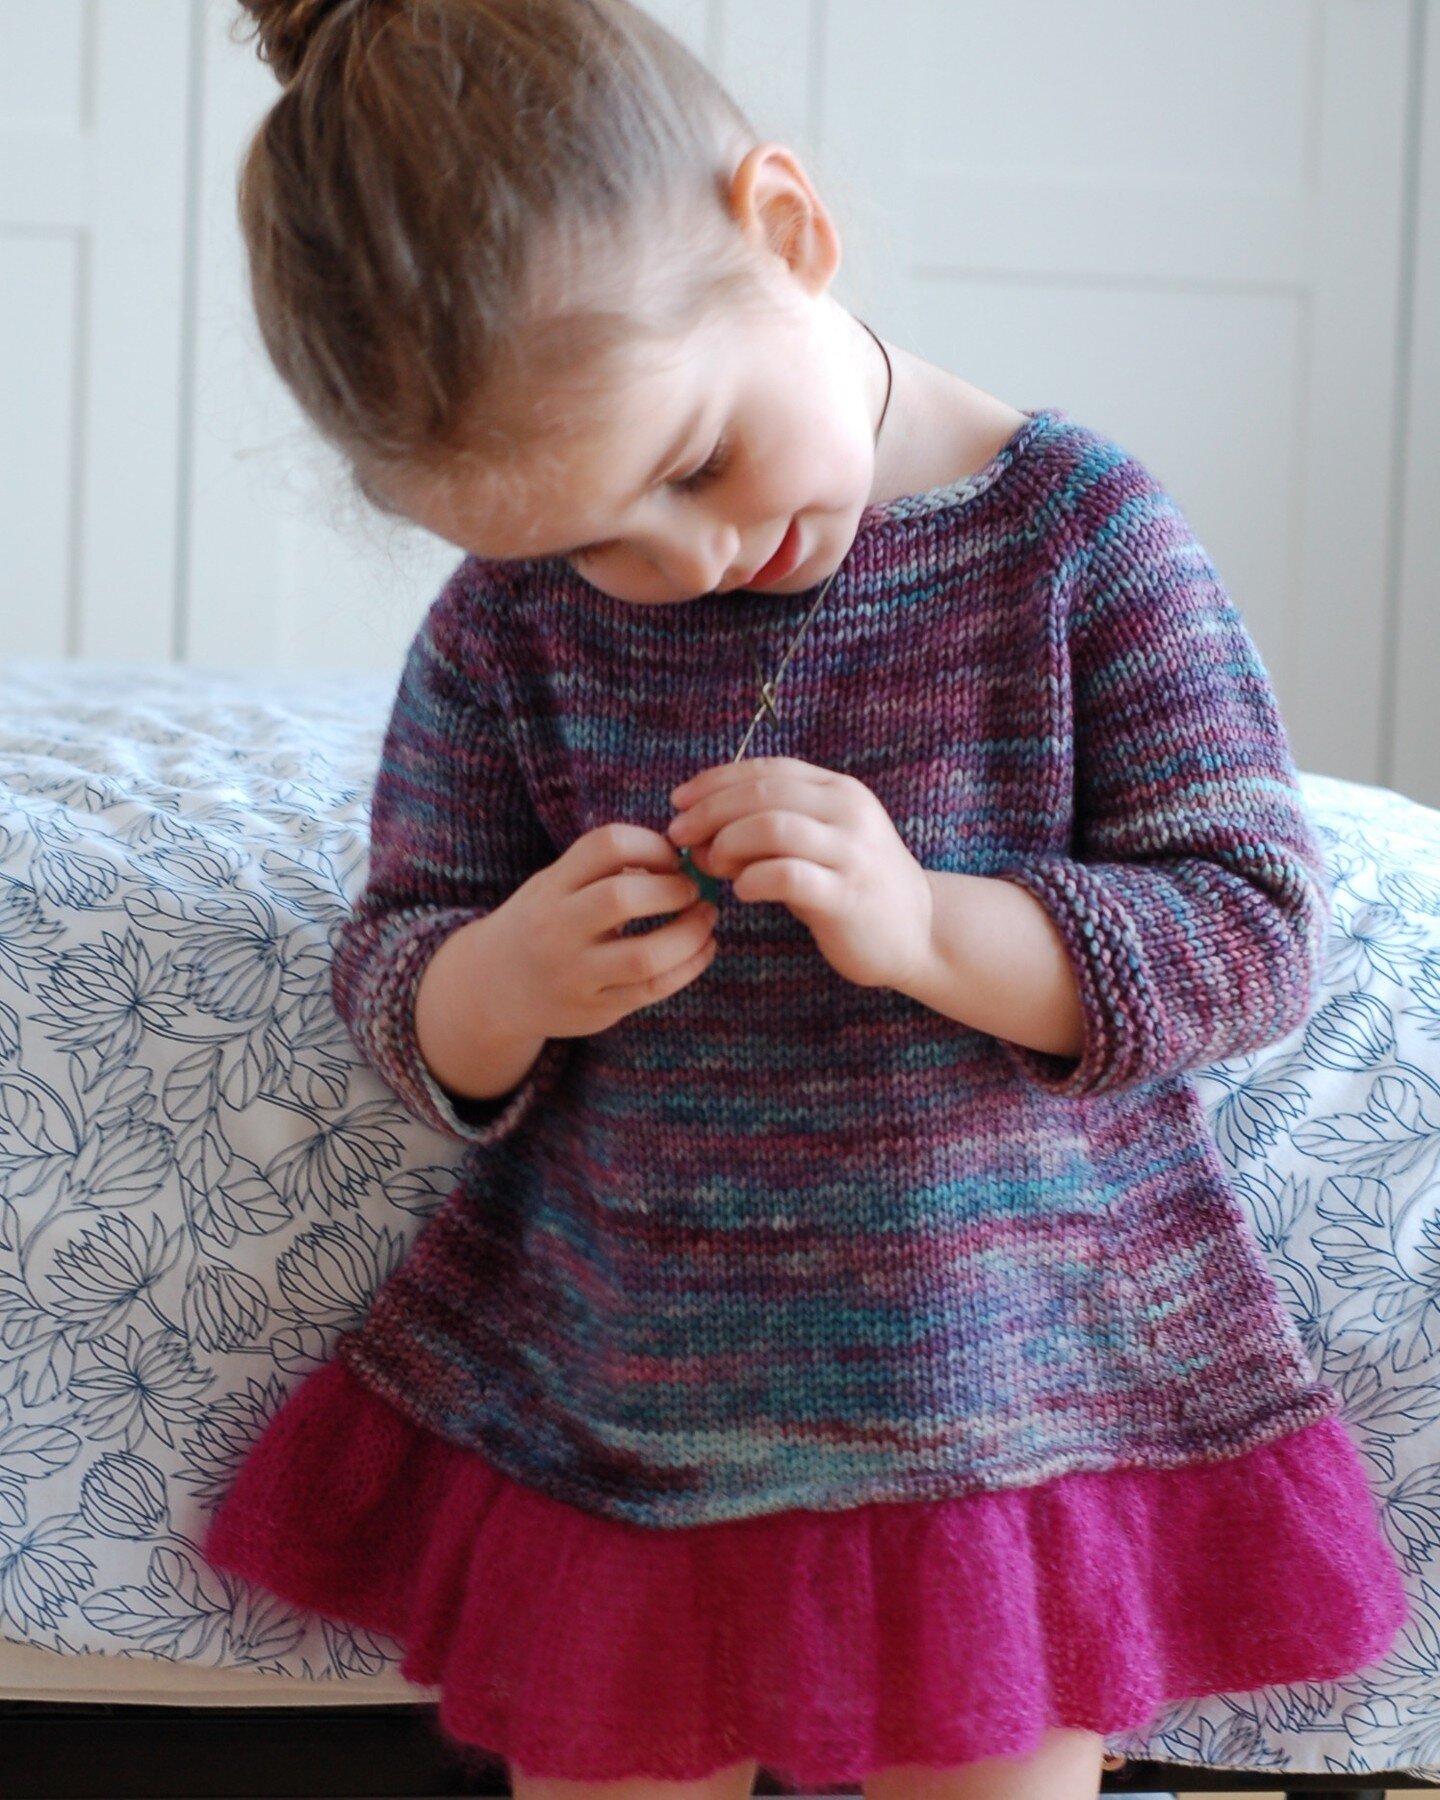 I just stumbled upon this old photo of my daughter in one of her favorite knits of all times 😍
Pattern: Tutu Top
Available in my Ravelry and Etsy store (follow link in bio)
.
.
.
#frogginette #tututop #frogginetteknittingpatterns #malabrigoyarn #mal